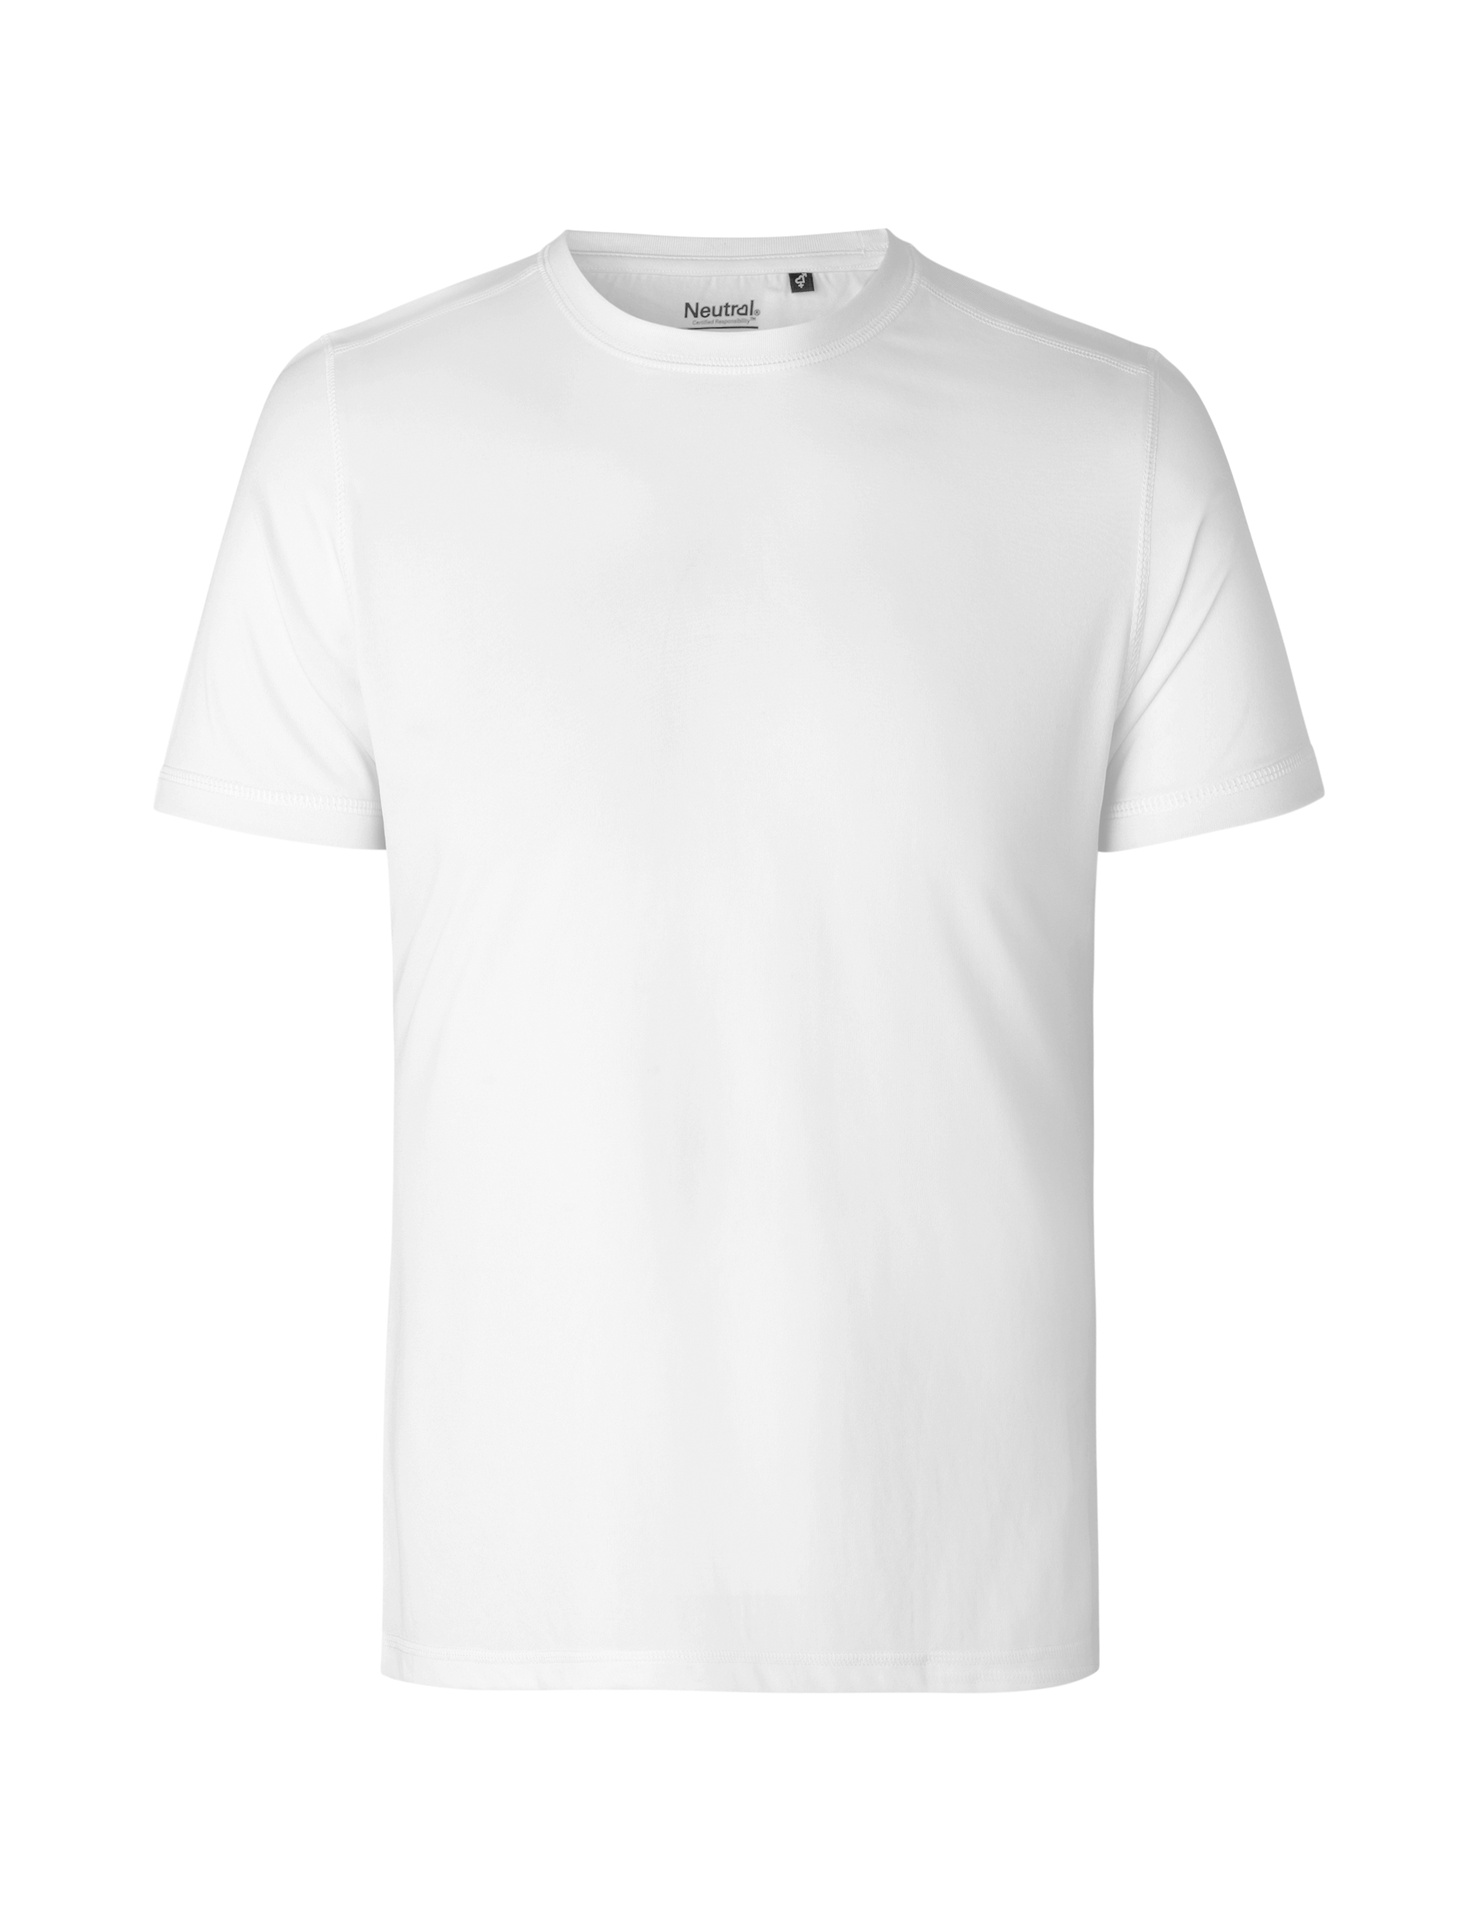 [PR/03748] Recycled Performance T-Shirt (White 01, S)